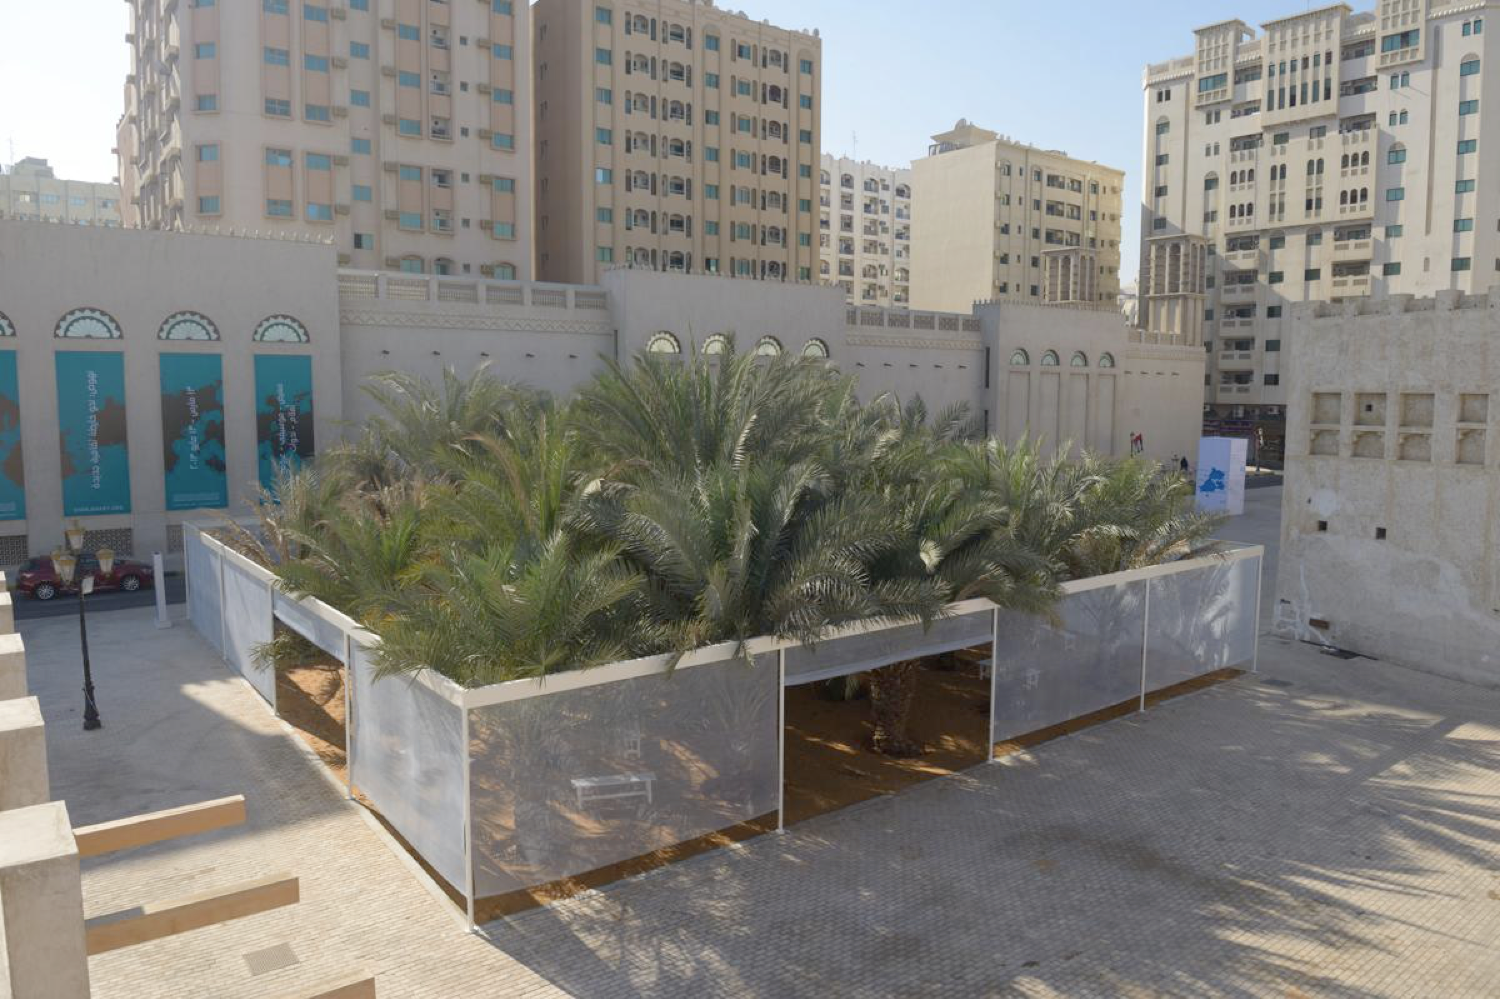 Office Kersten Geers David Van Severes, 'OASES,' 2013. Three public parks. Dimensions variable. Installation view: Sharjah Biennial 11, Arts Square. Image courtesy of the Sharjah Art Foundation.